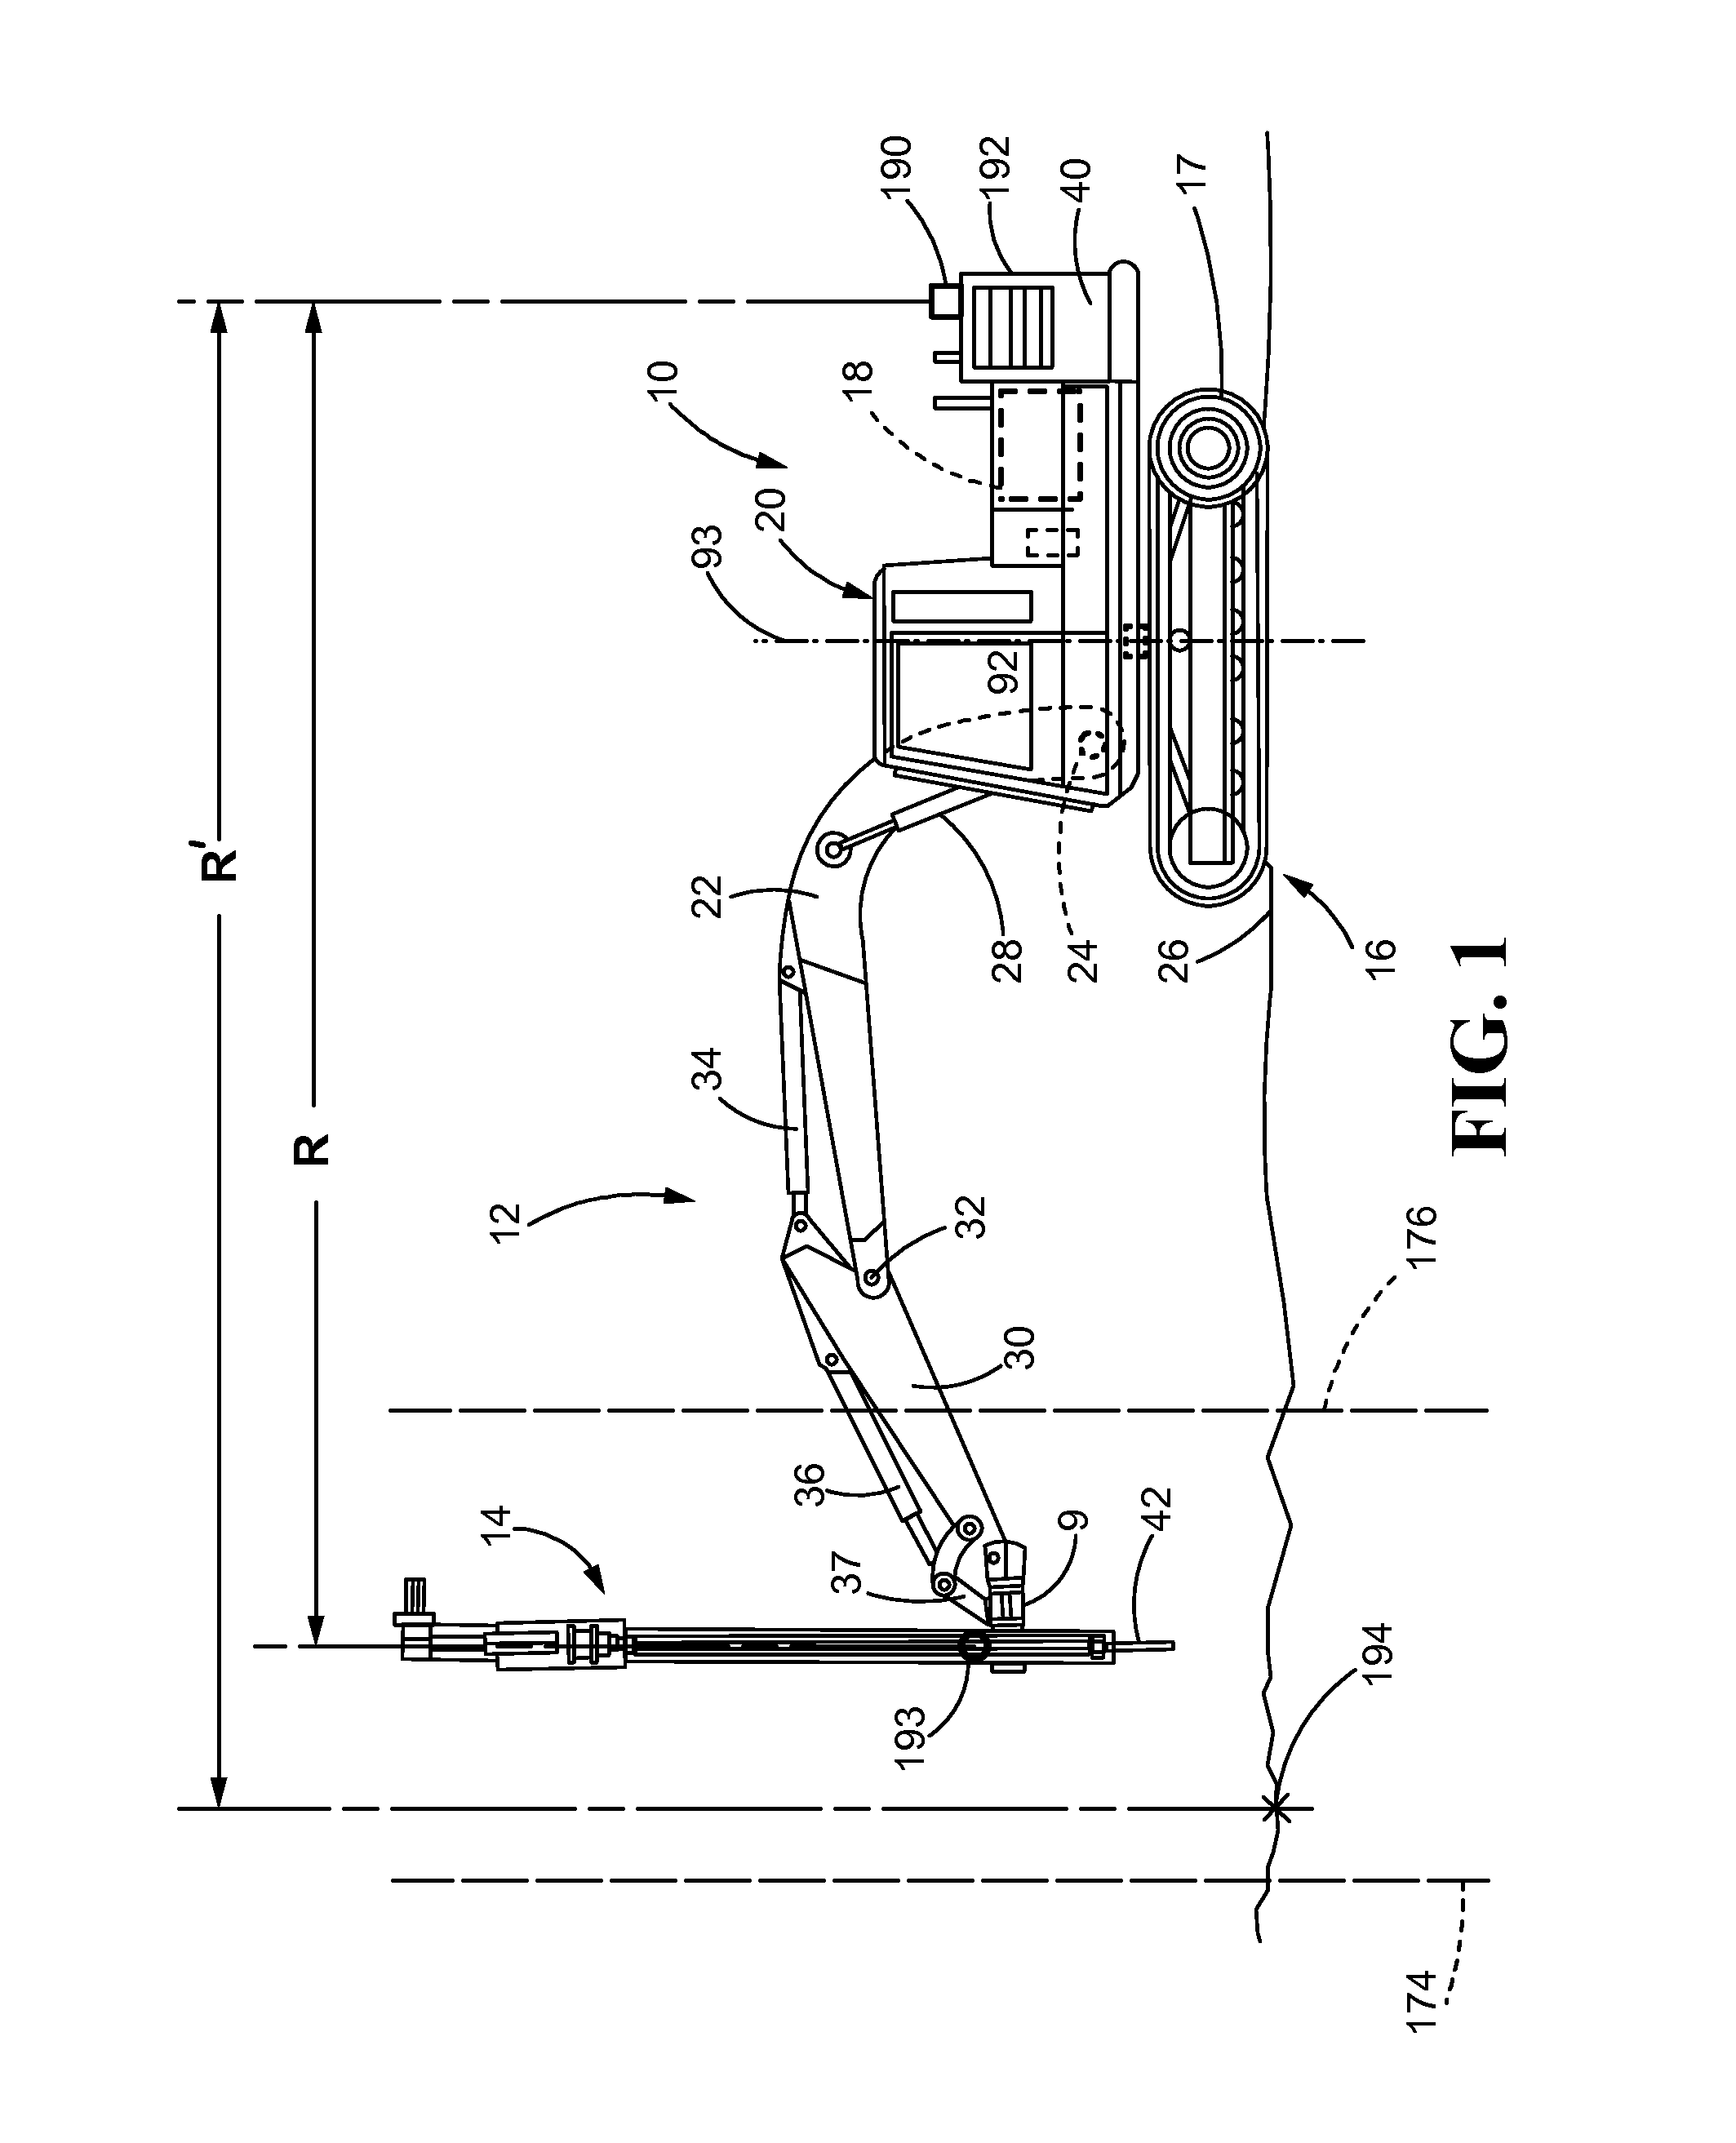 Automatic Swing and Radius Control System and Method for a Machine Implement